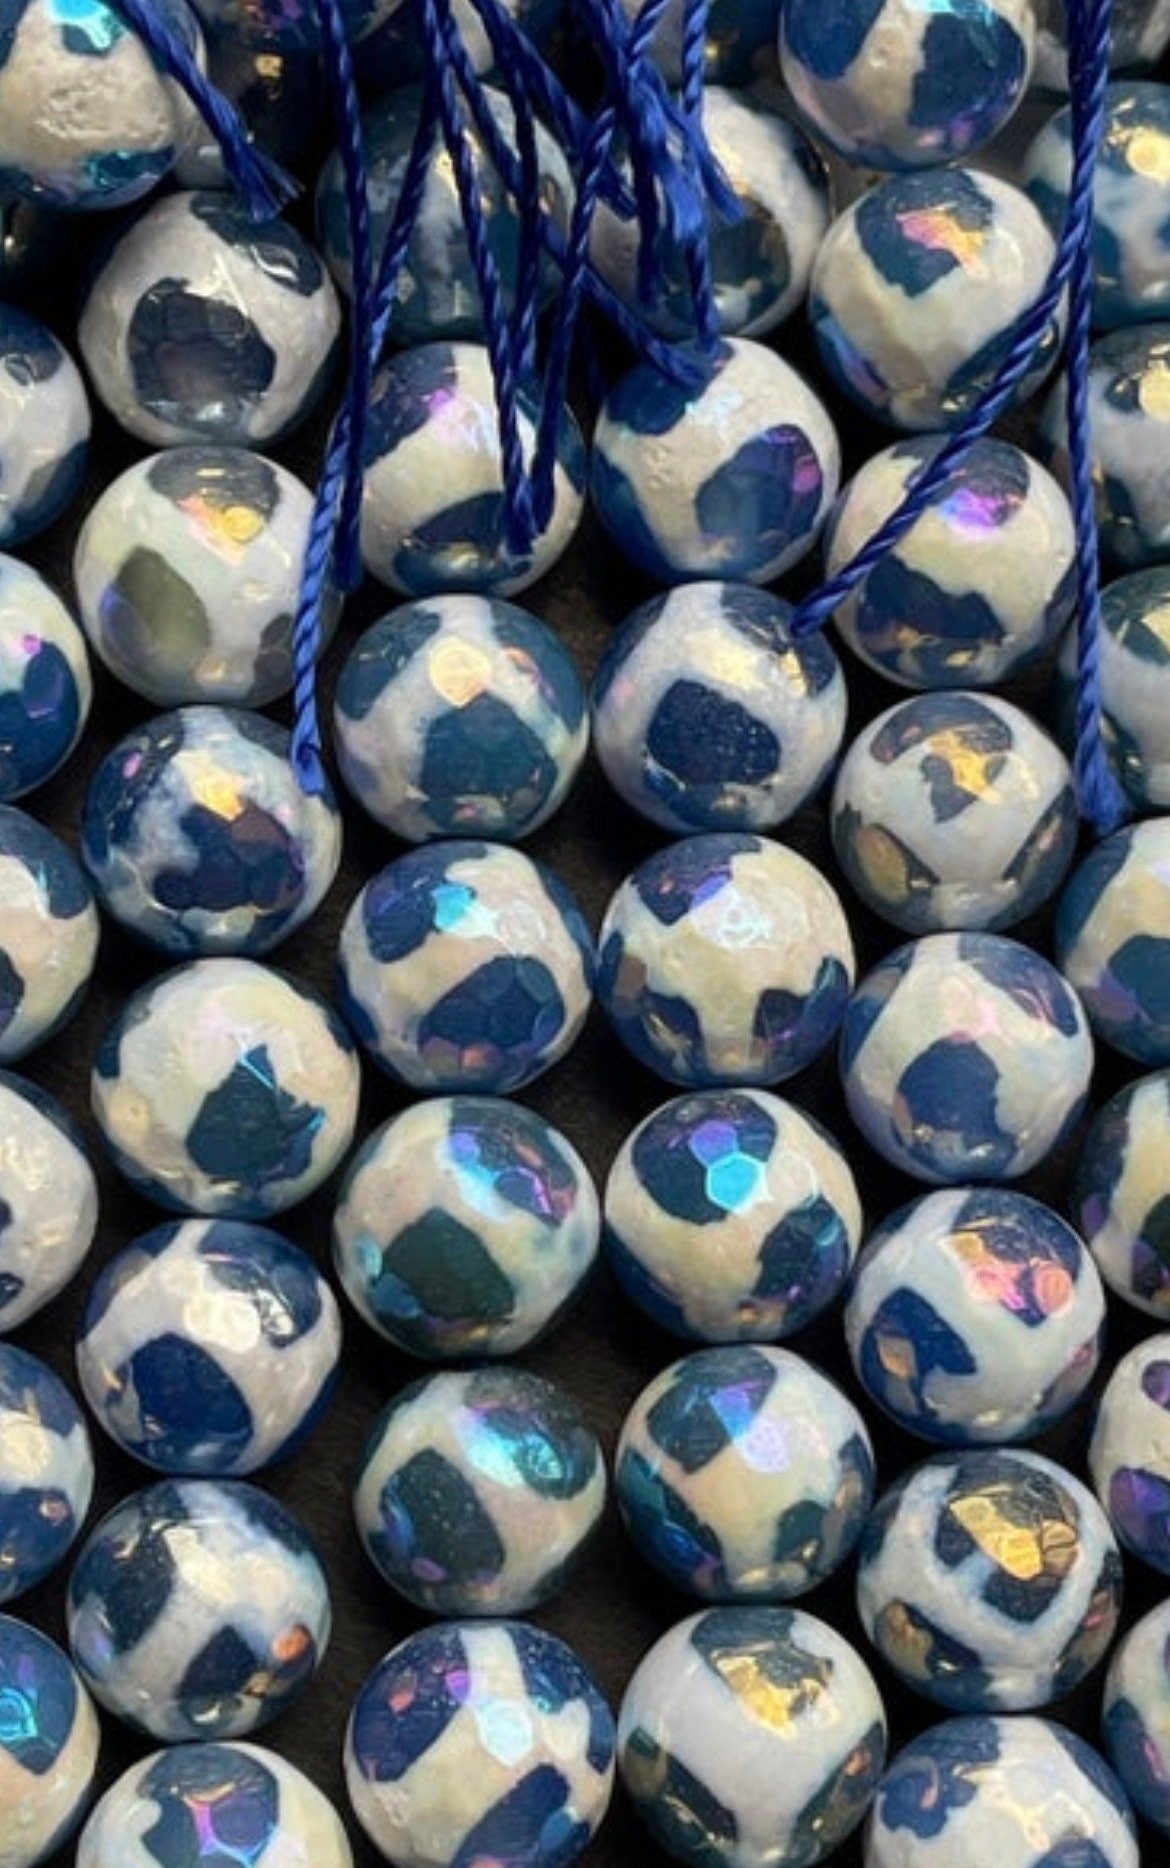 Mystic Hand Painted Tibetan Gemstone Bead Faceted 8mm 10mm 12mm Round Bead, Gorgeous Blue White Color Hand Painted Tibetan Beads